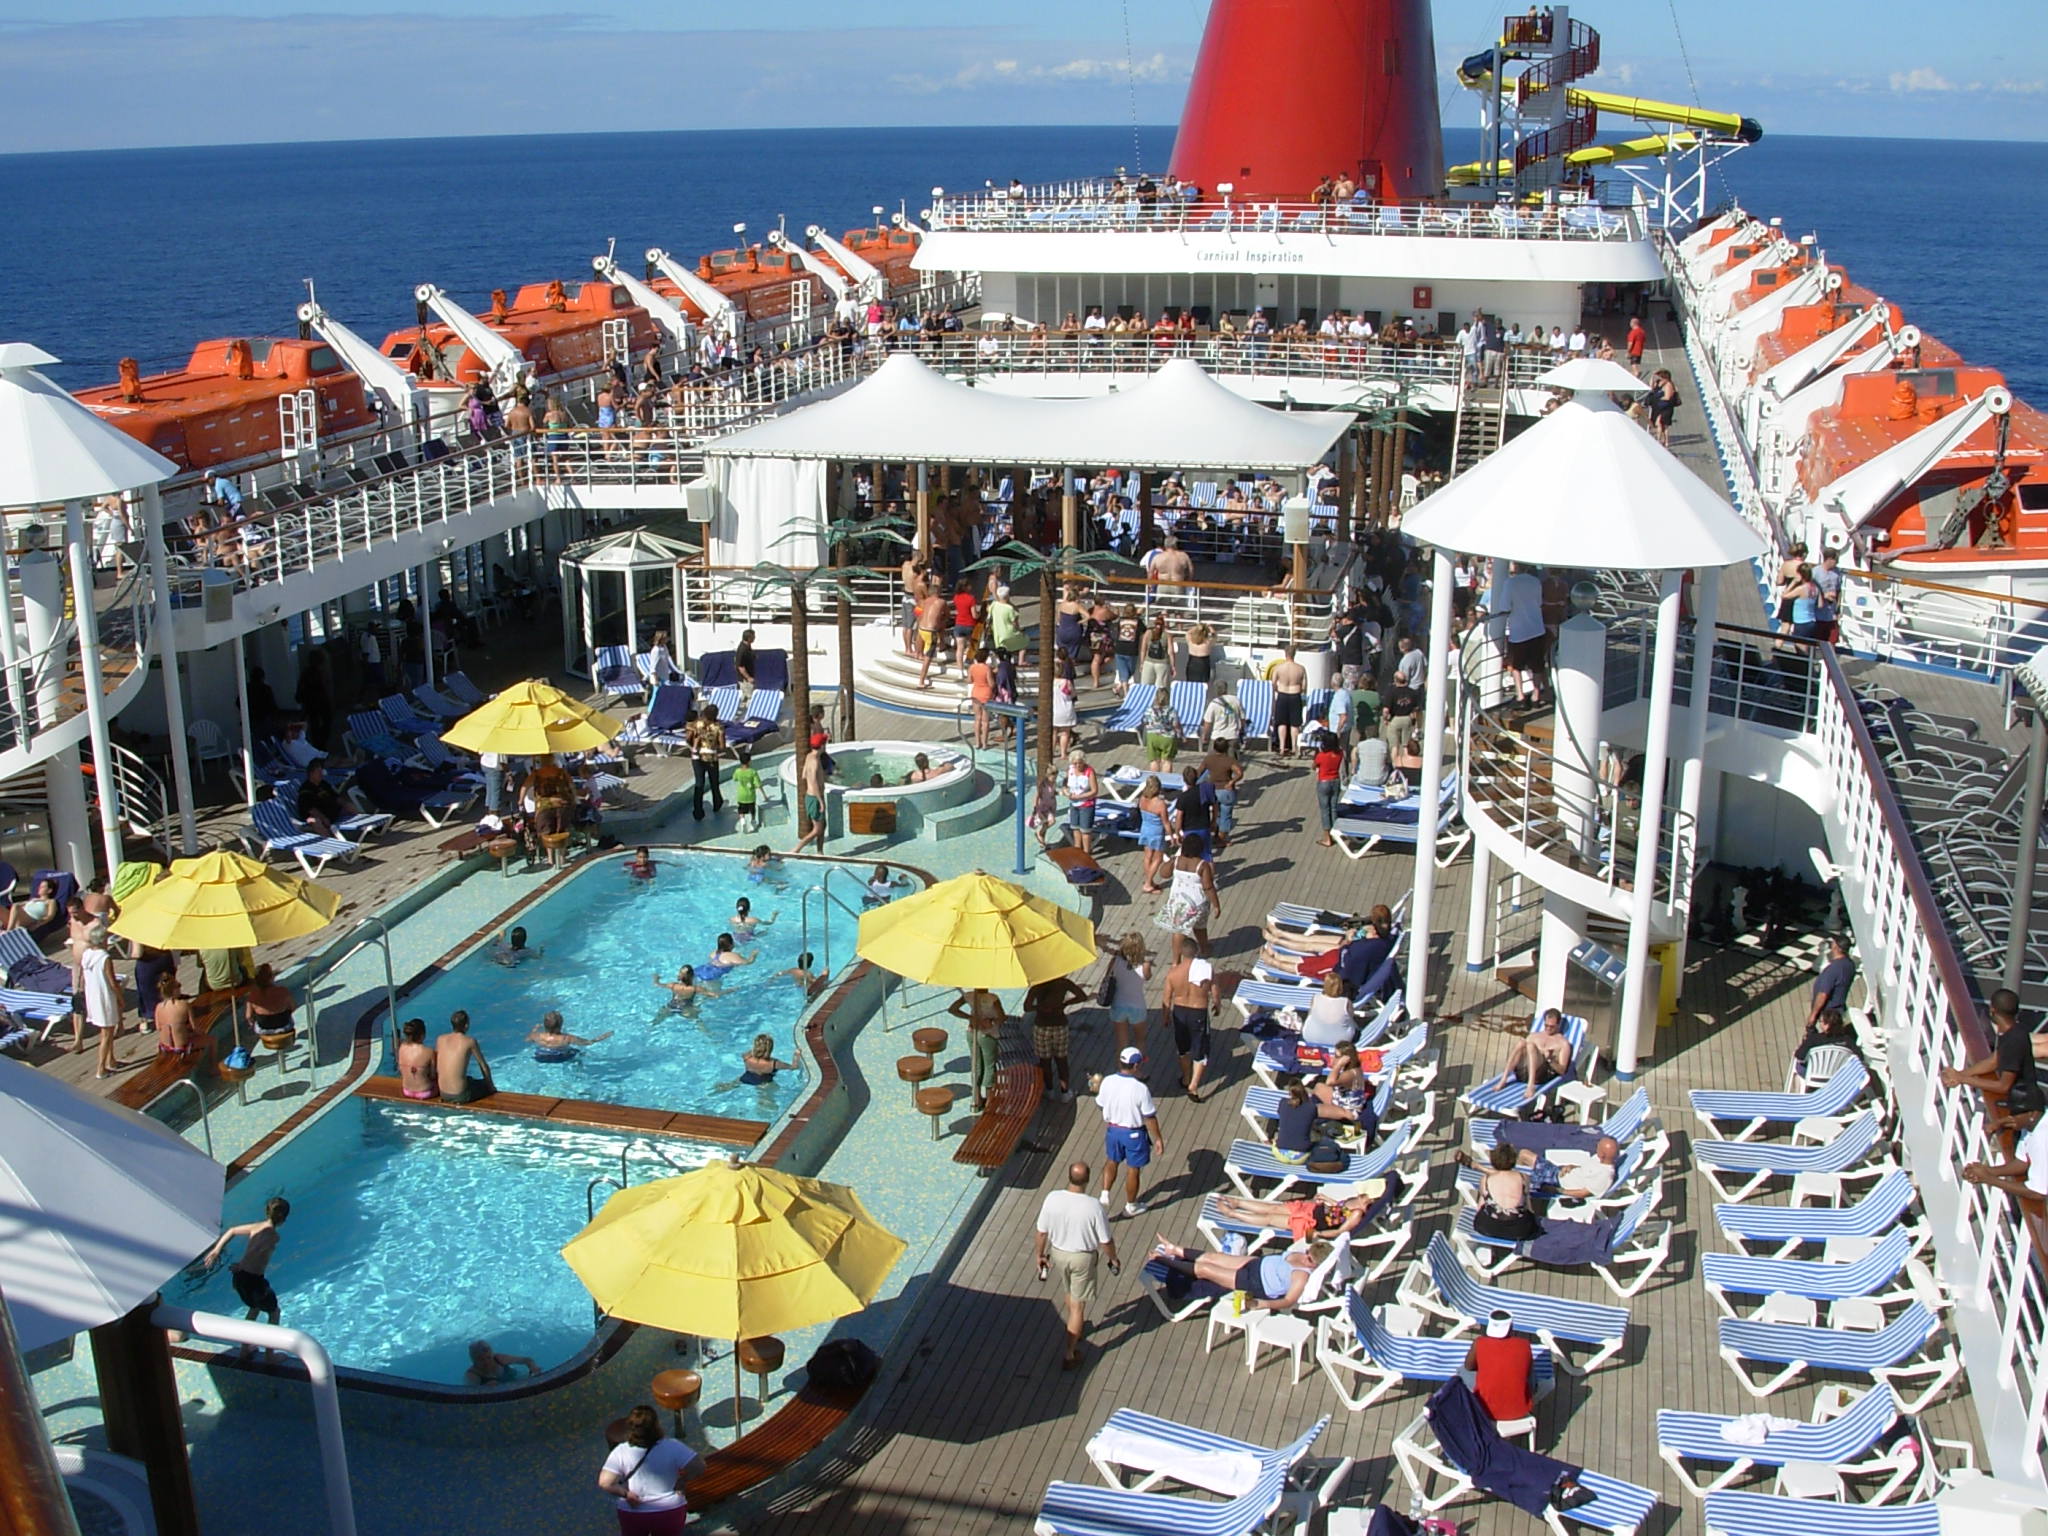 Pool..hot tubs and more on th Lido Deck
